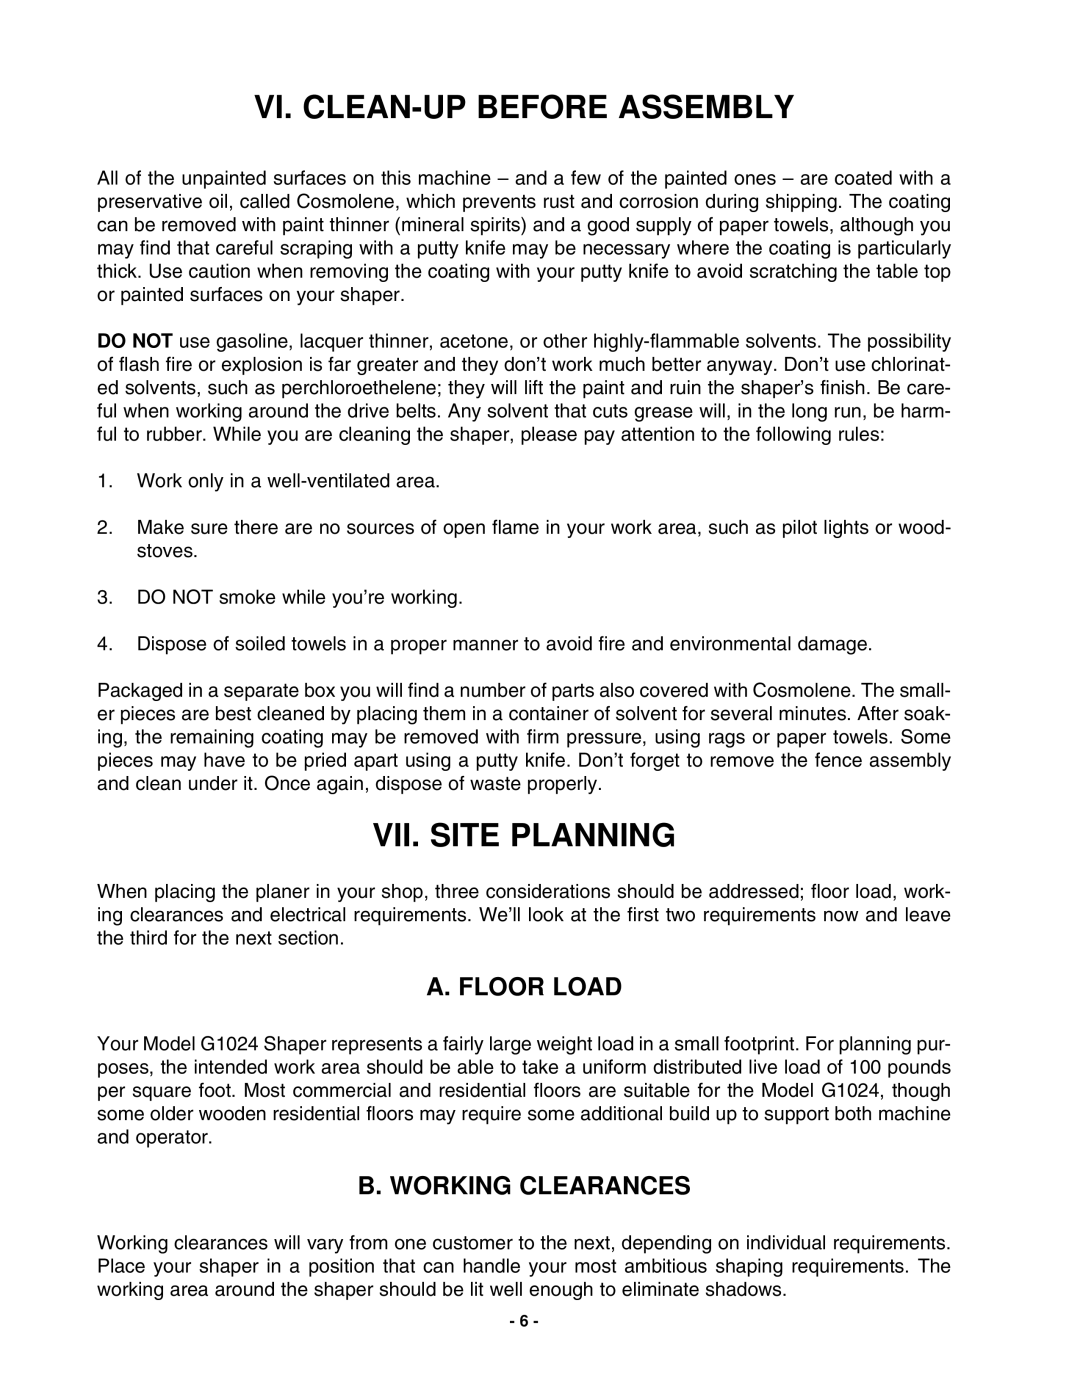 Grizzly G1024 instruction manual Vi. Clean-Upbefore Assembly, Vii. Site Planning, A. Floor Load, B. Working Clearances 